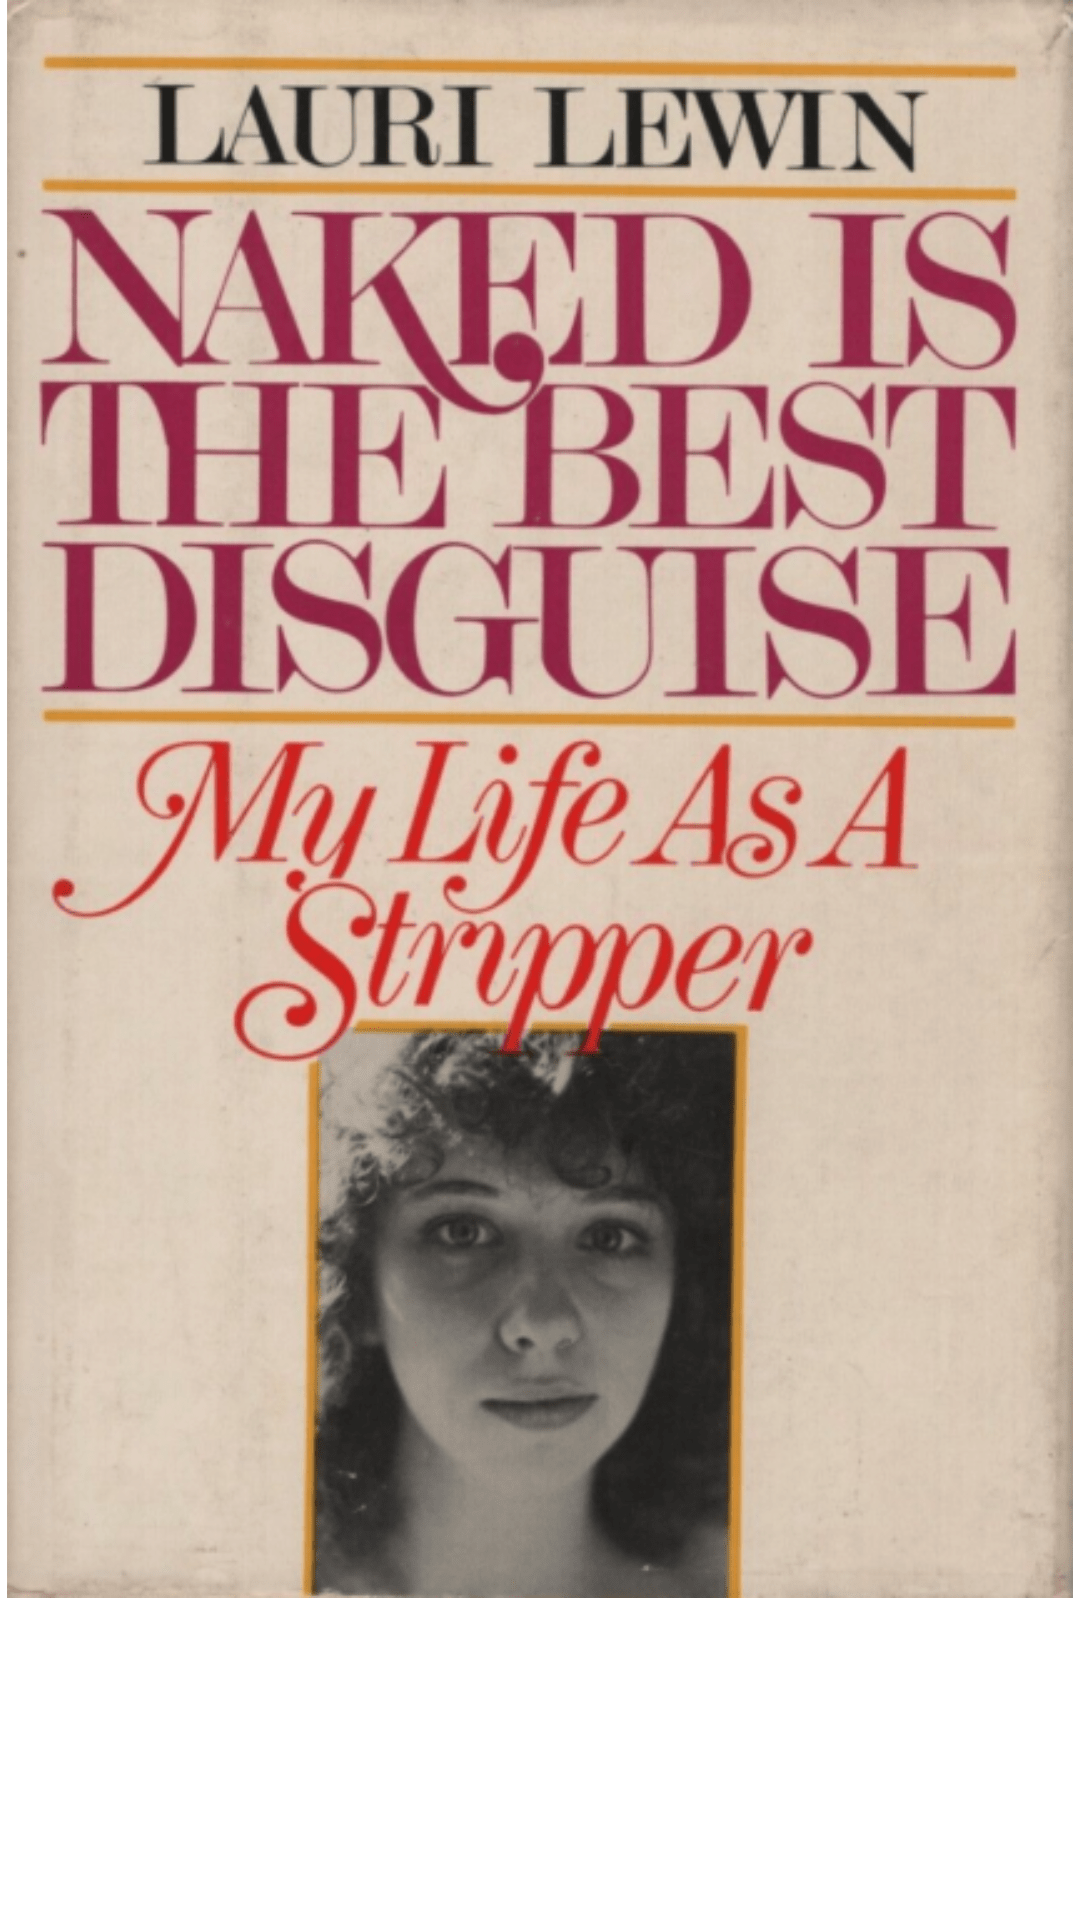 Naked is the best disguise: My life as a stripper